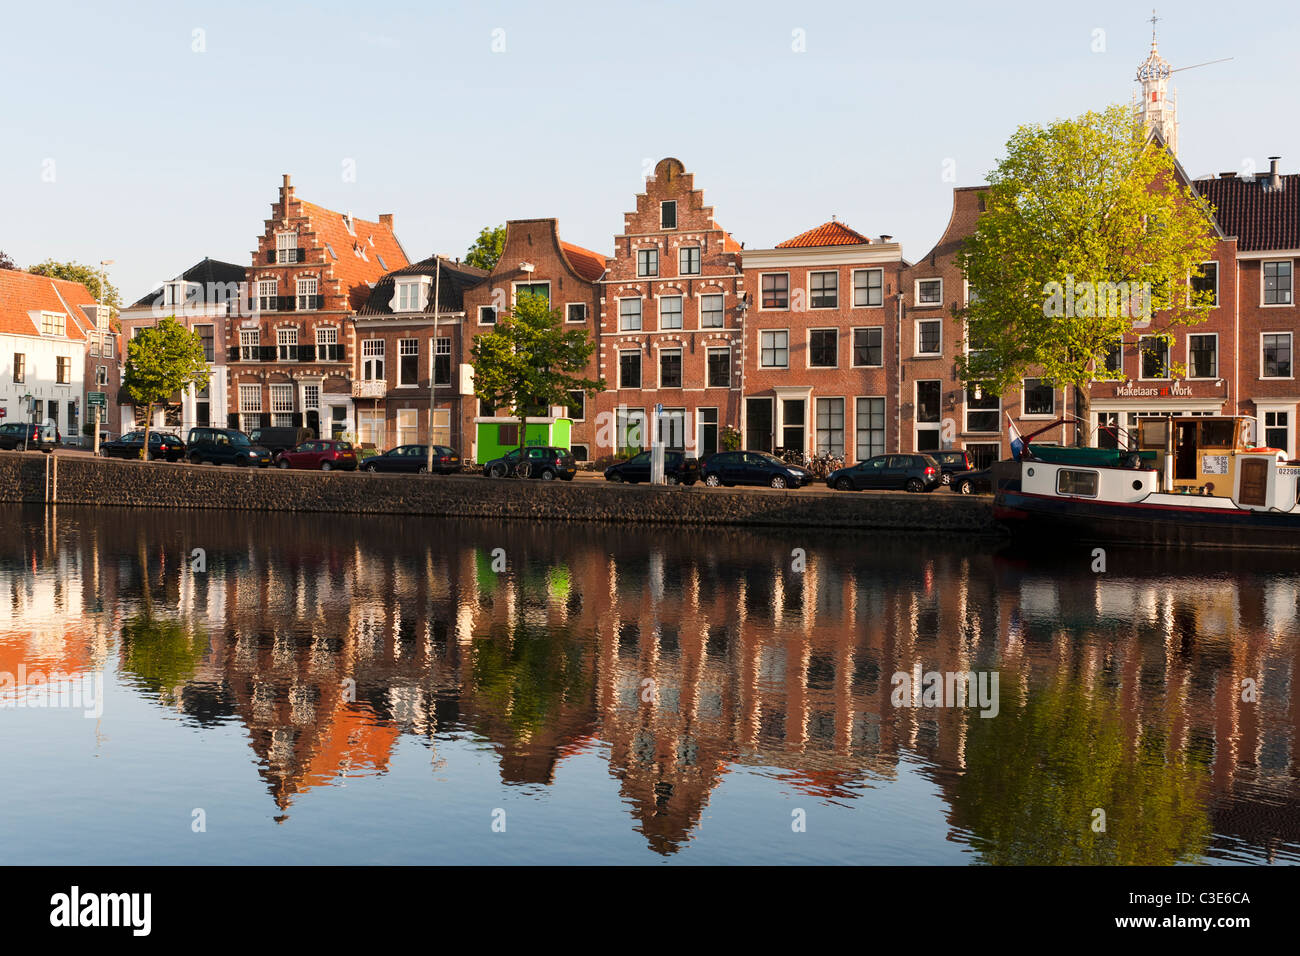 Houses along the Spaarne river in Haarlem, Netherlands Stock Photo